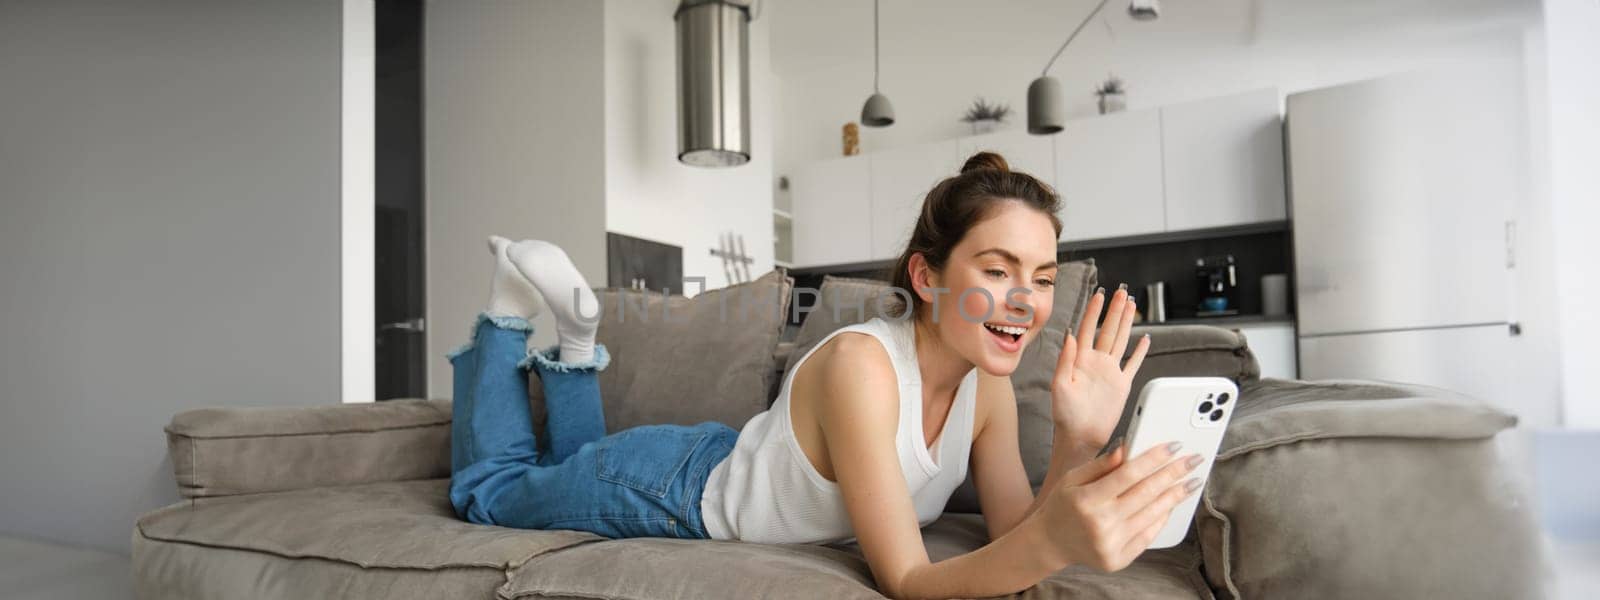 Carefree young smiling woman, lying on sofa, saying hello and waving at smartphone screen, video calling someone, chatting online using mobile app.